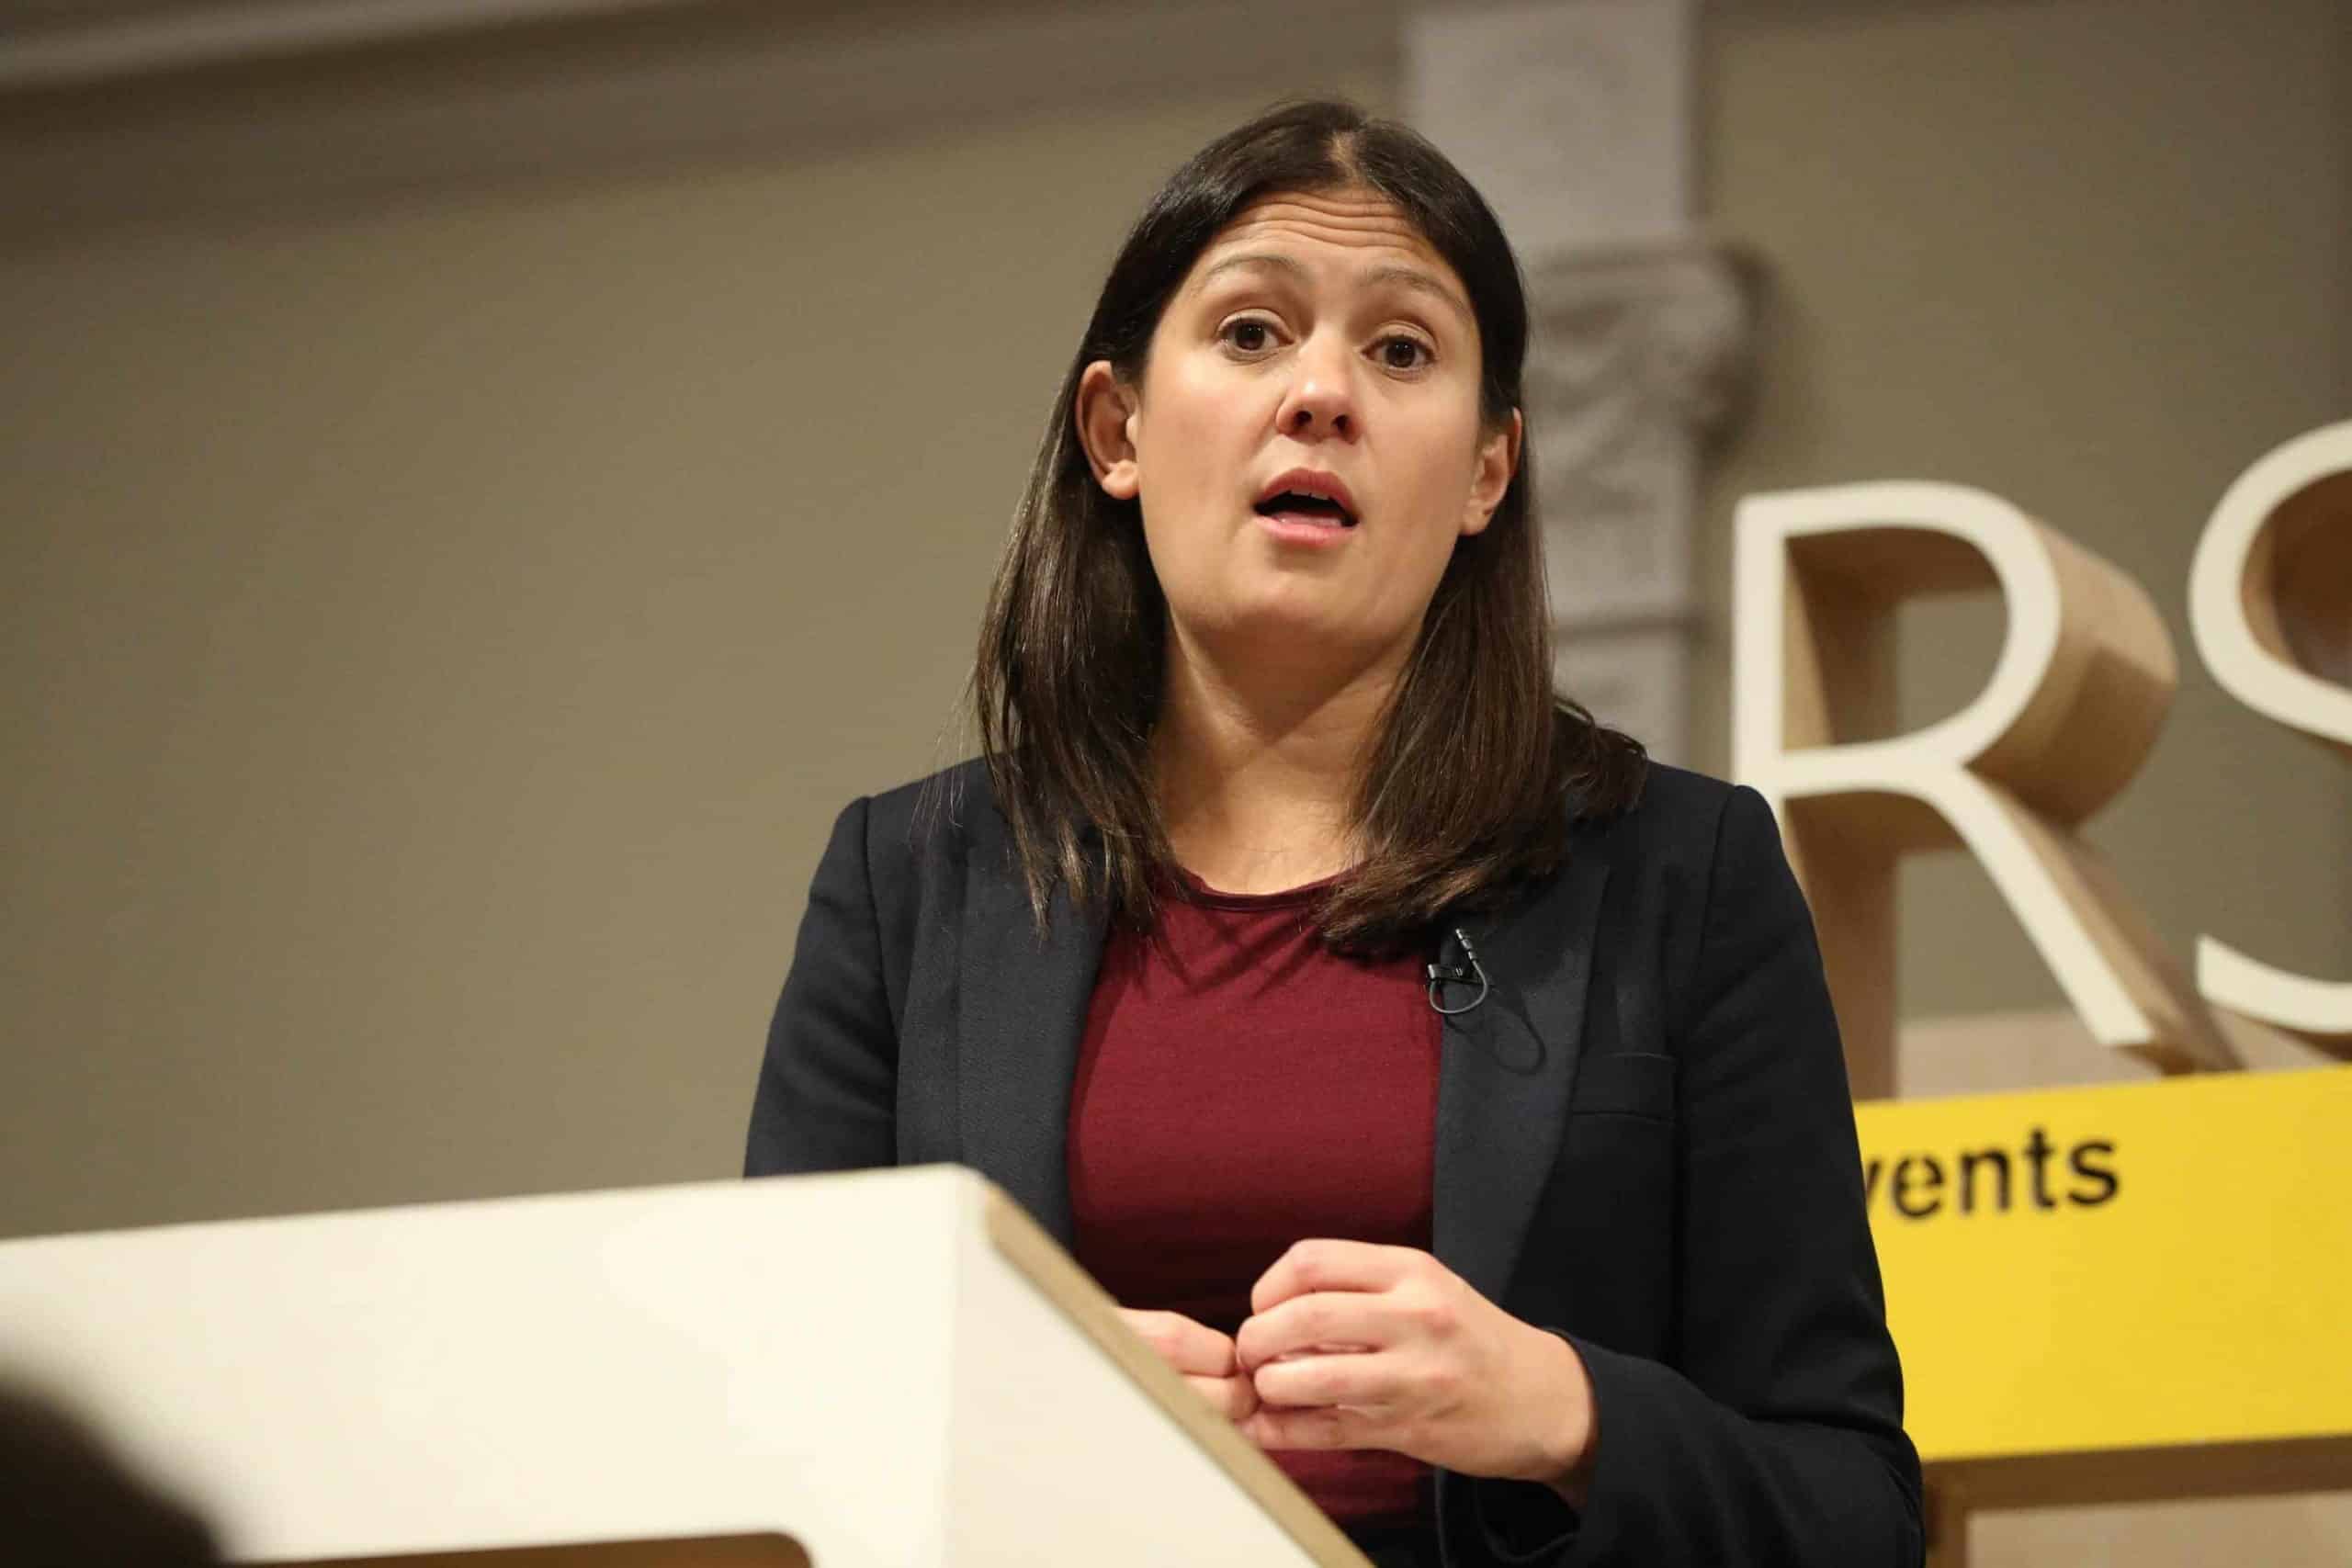 Lisa Nandy vows to give billions of pounds in economic funding directly to councils